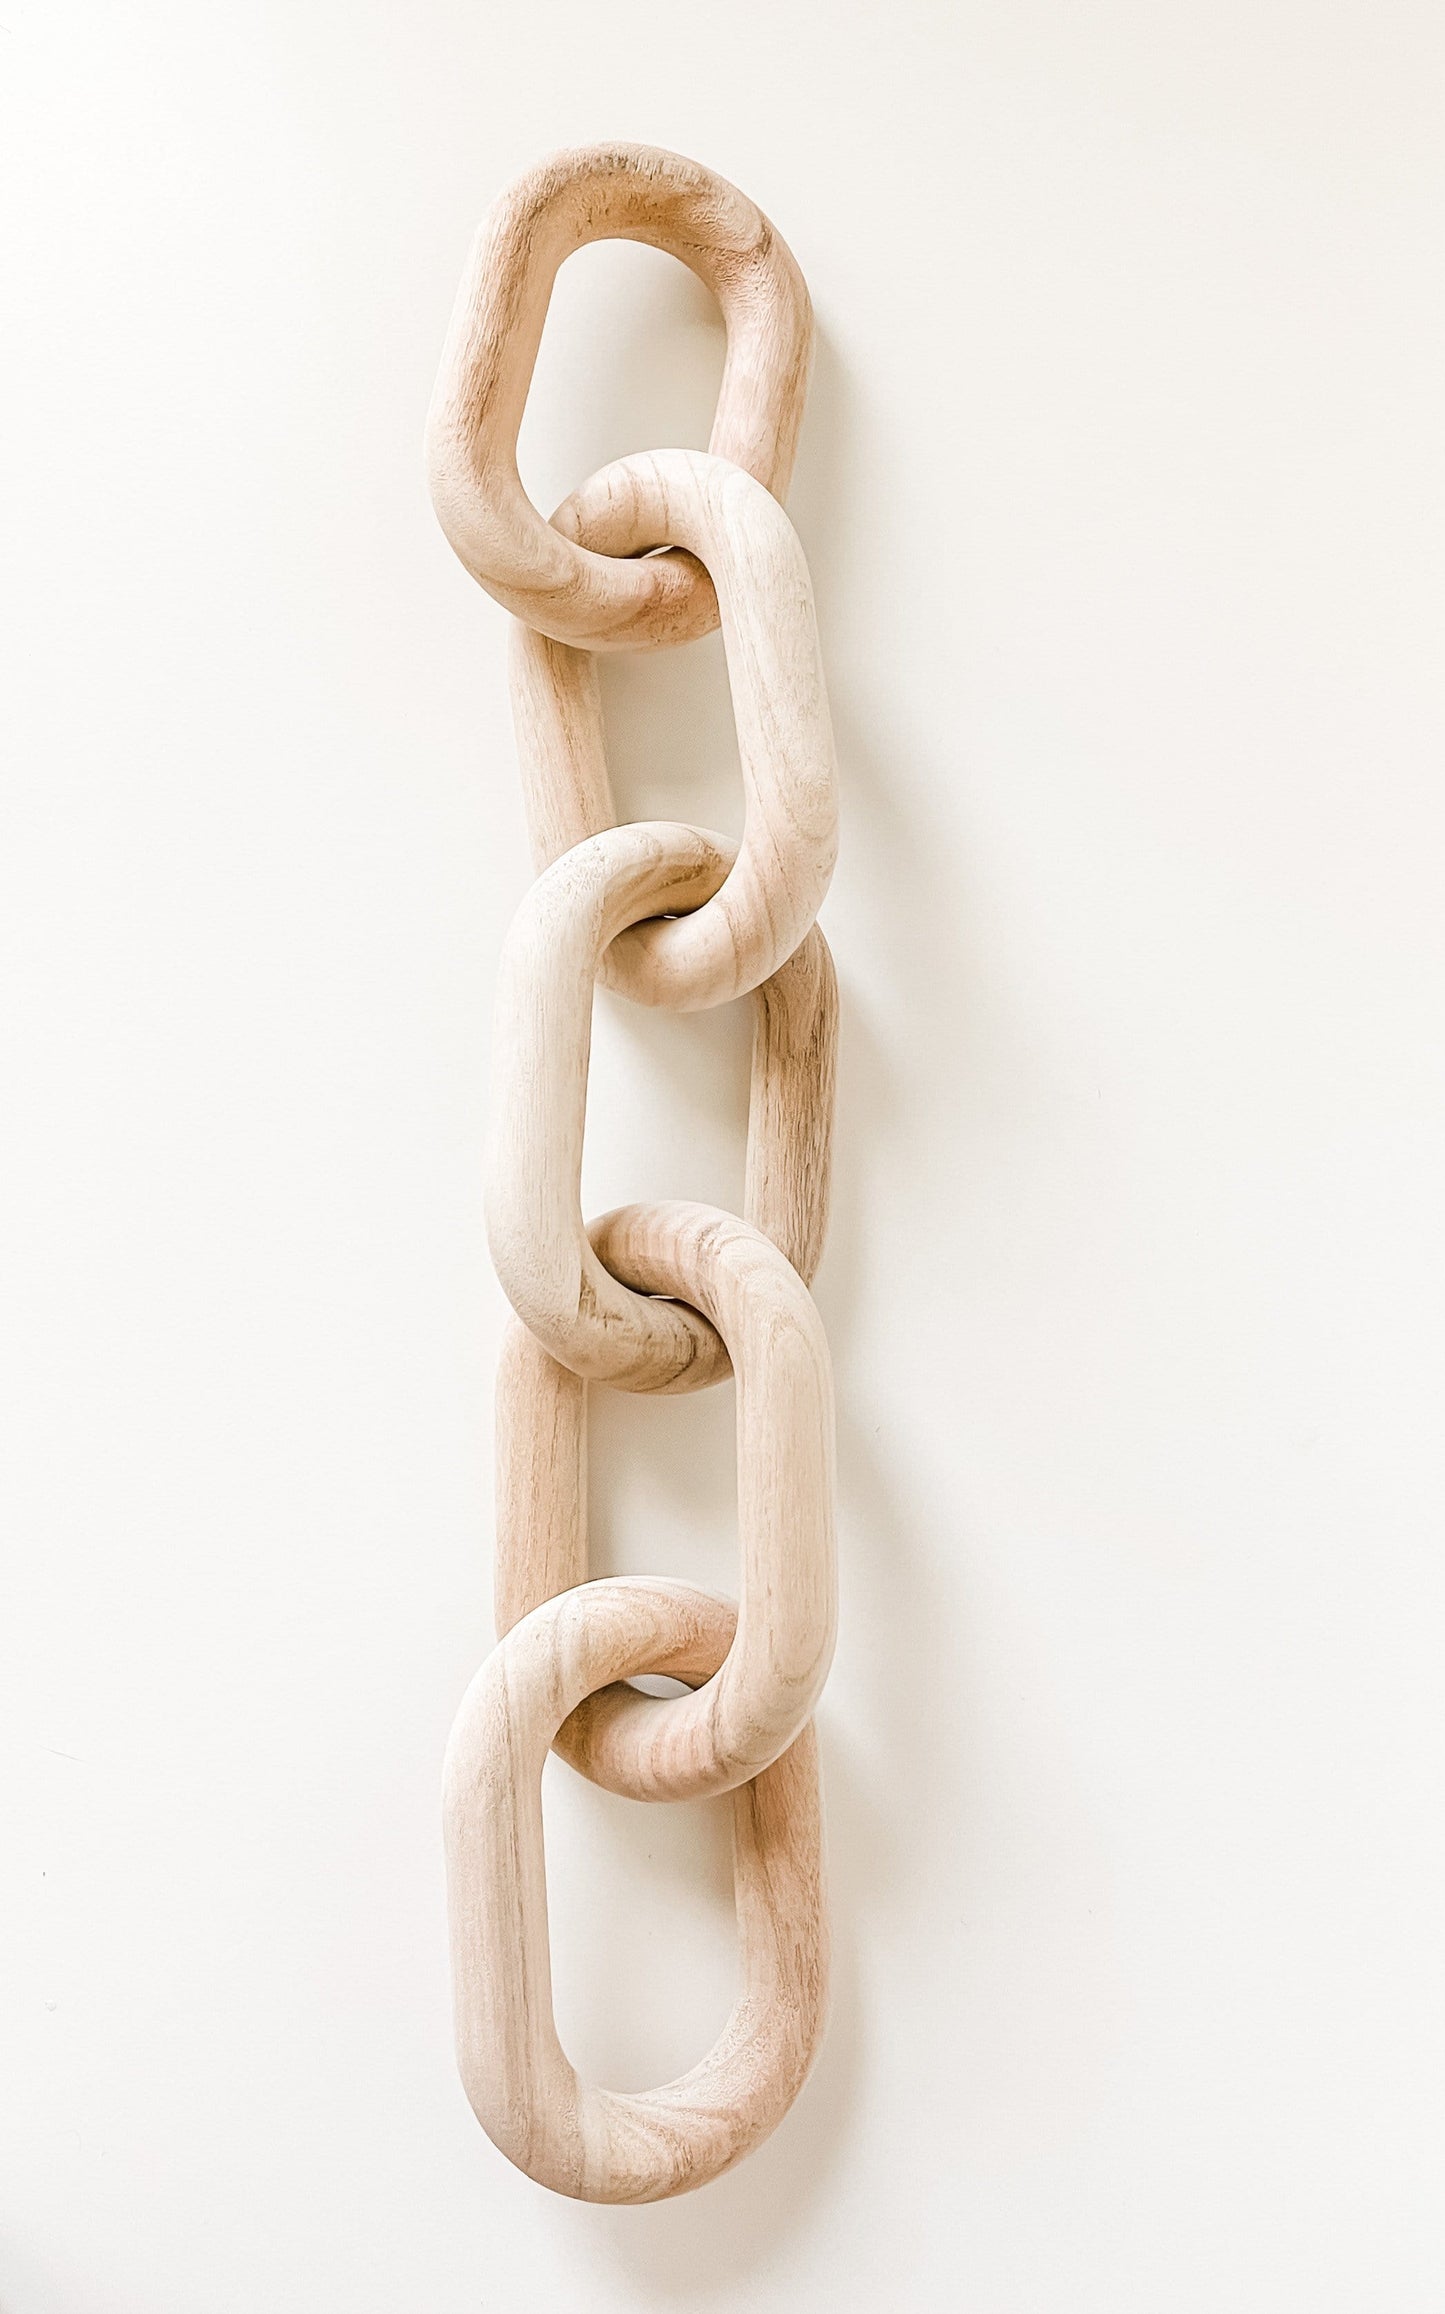 Hand-crafted Wooden Decor: Bowls Chains and Knots - chain - 